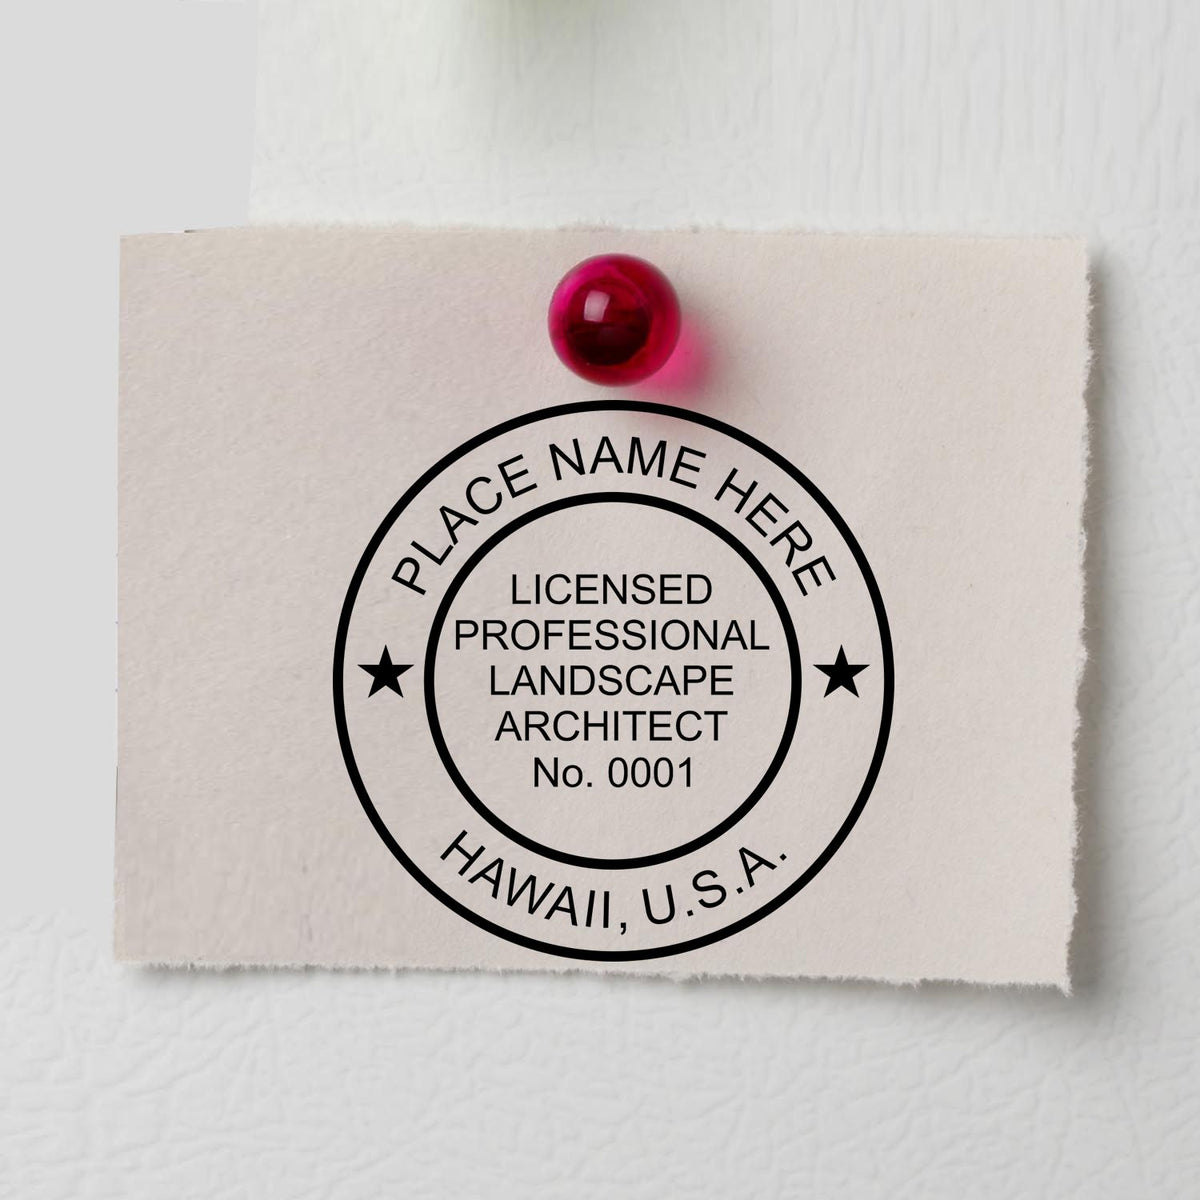 A lifestyle photo showing a stamped image of the Digital Hawaii Landscape Architect Stamp on a piece of paper